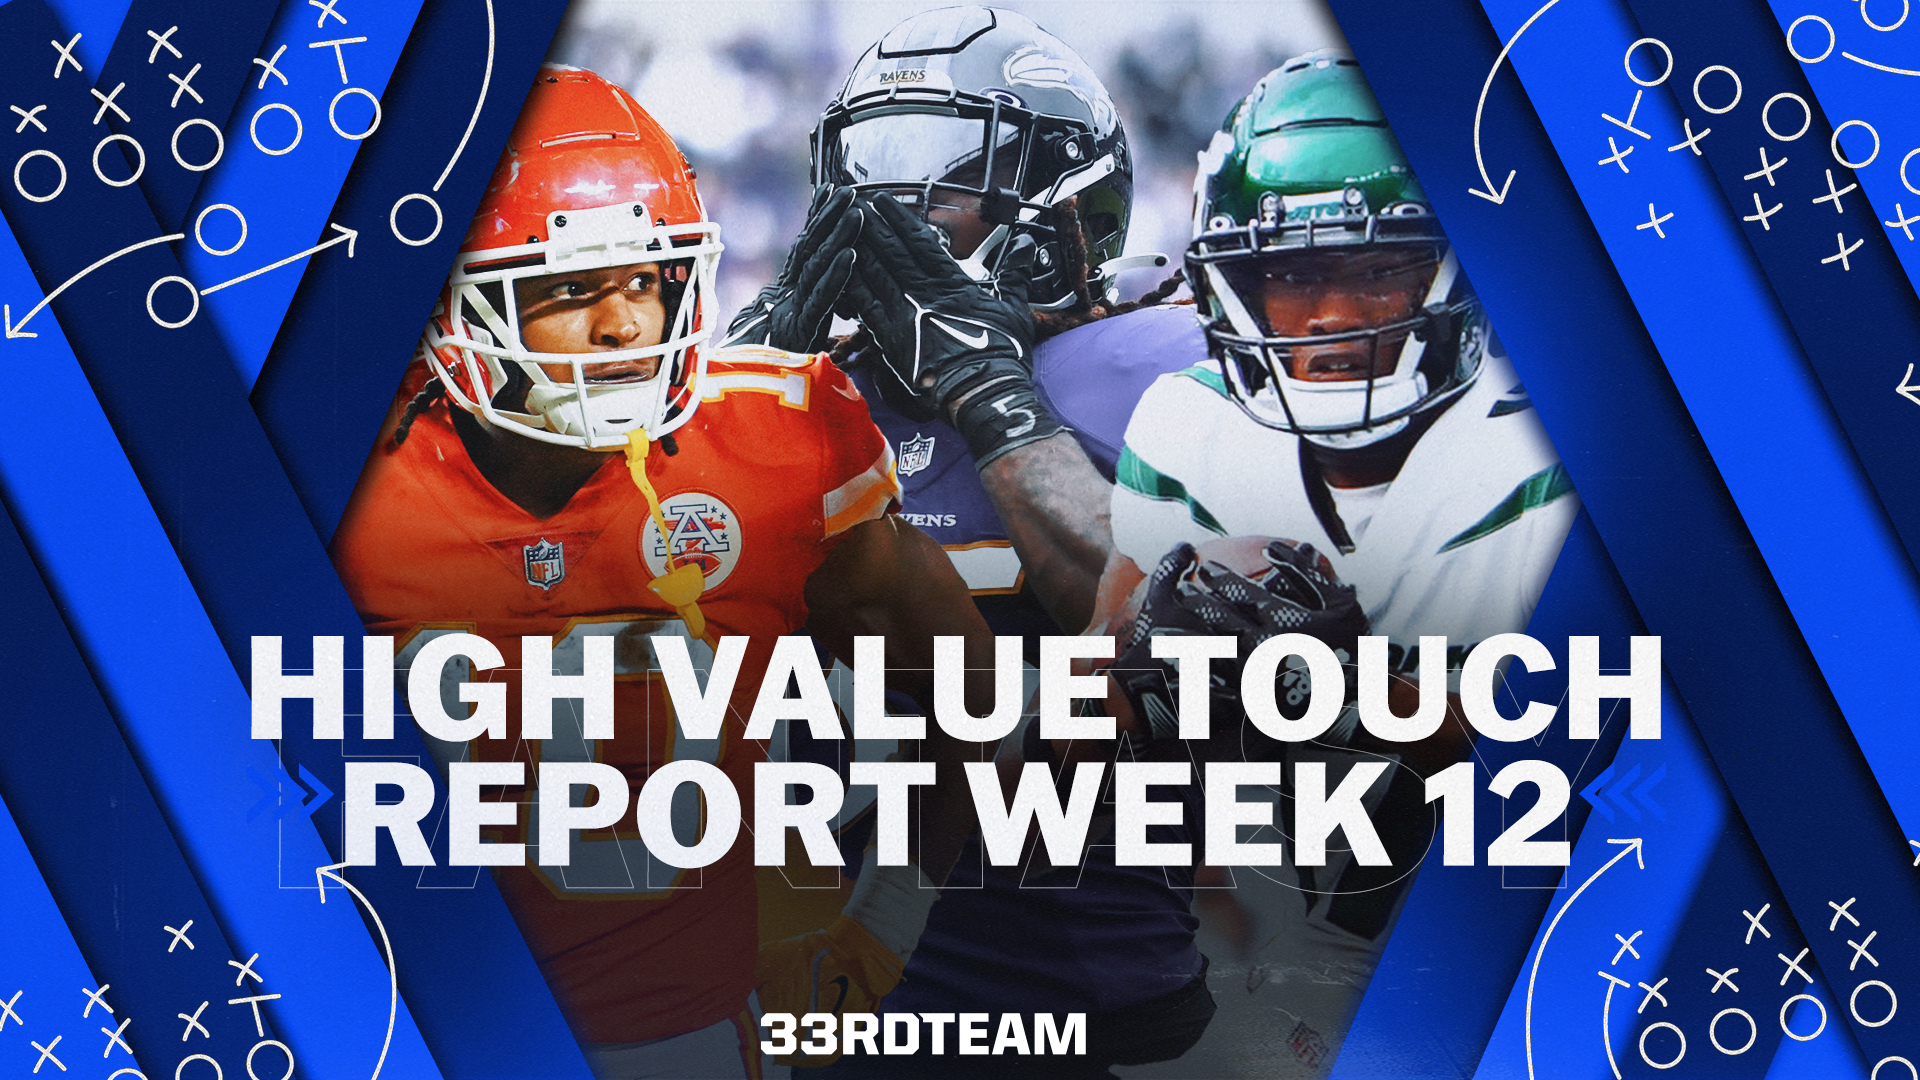 High-Value Touch Report: Week 12 Fantasy Football Rushing, Receiving Data